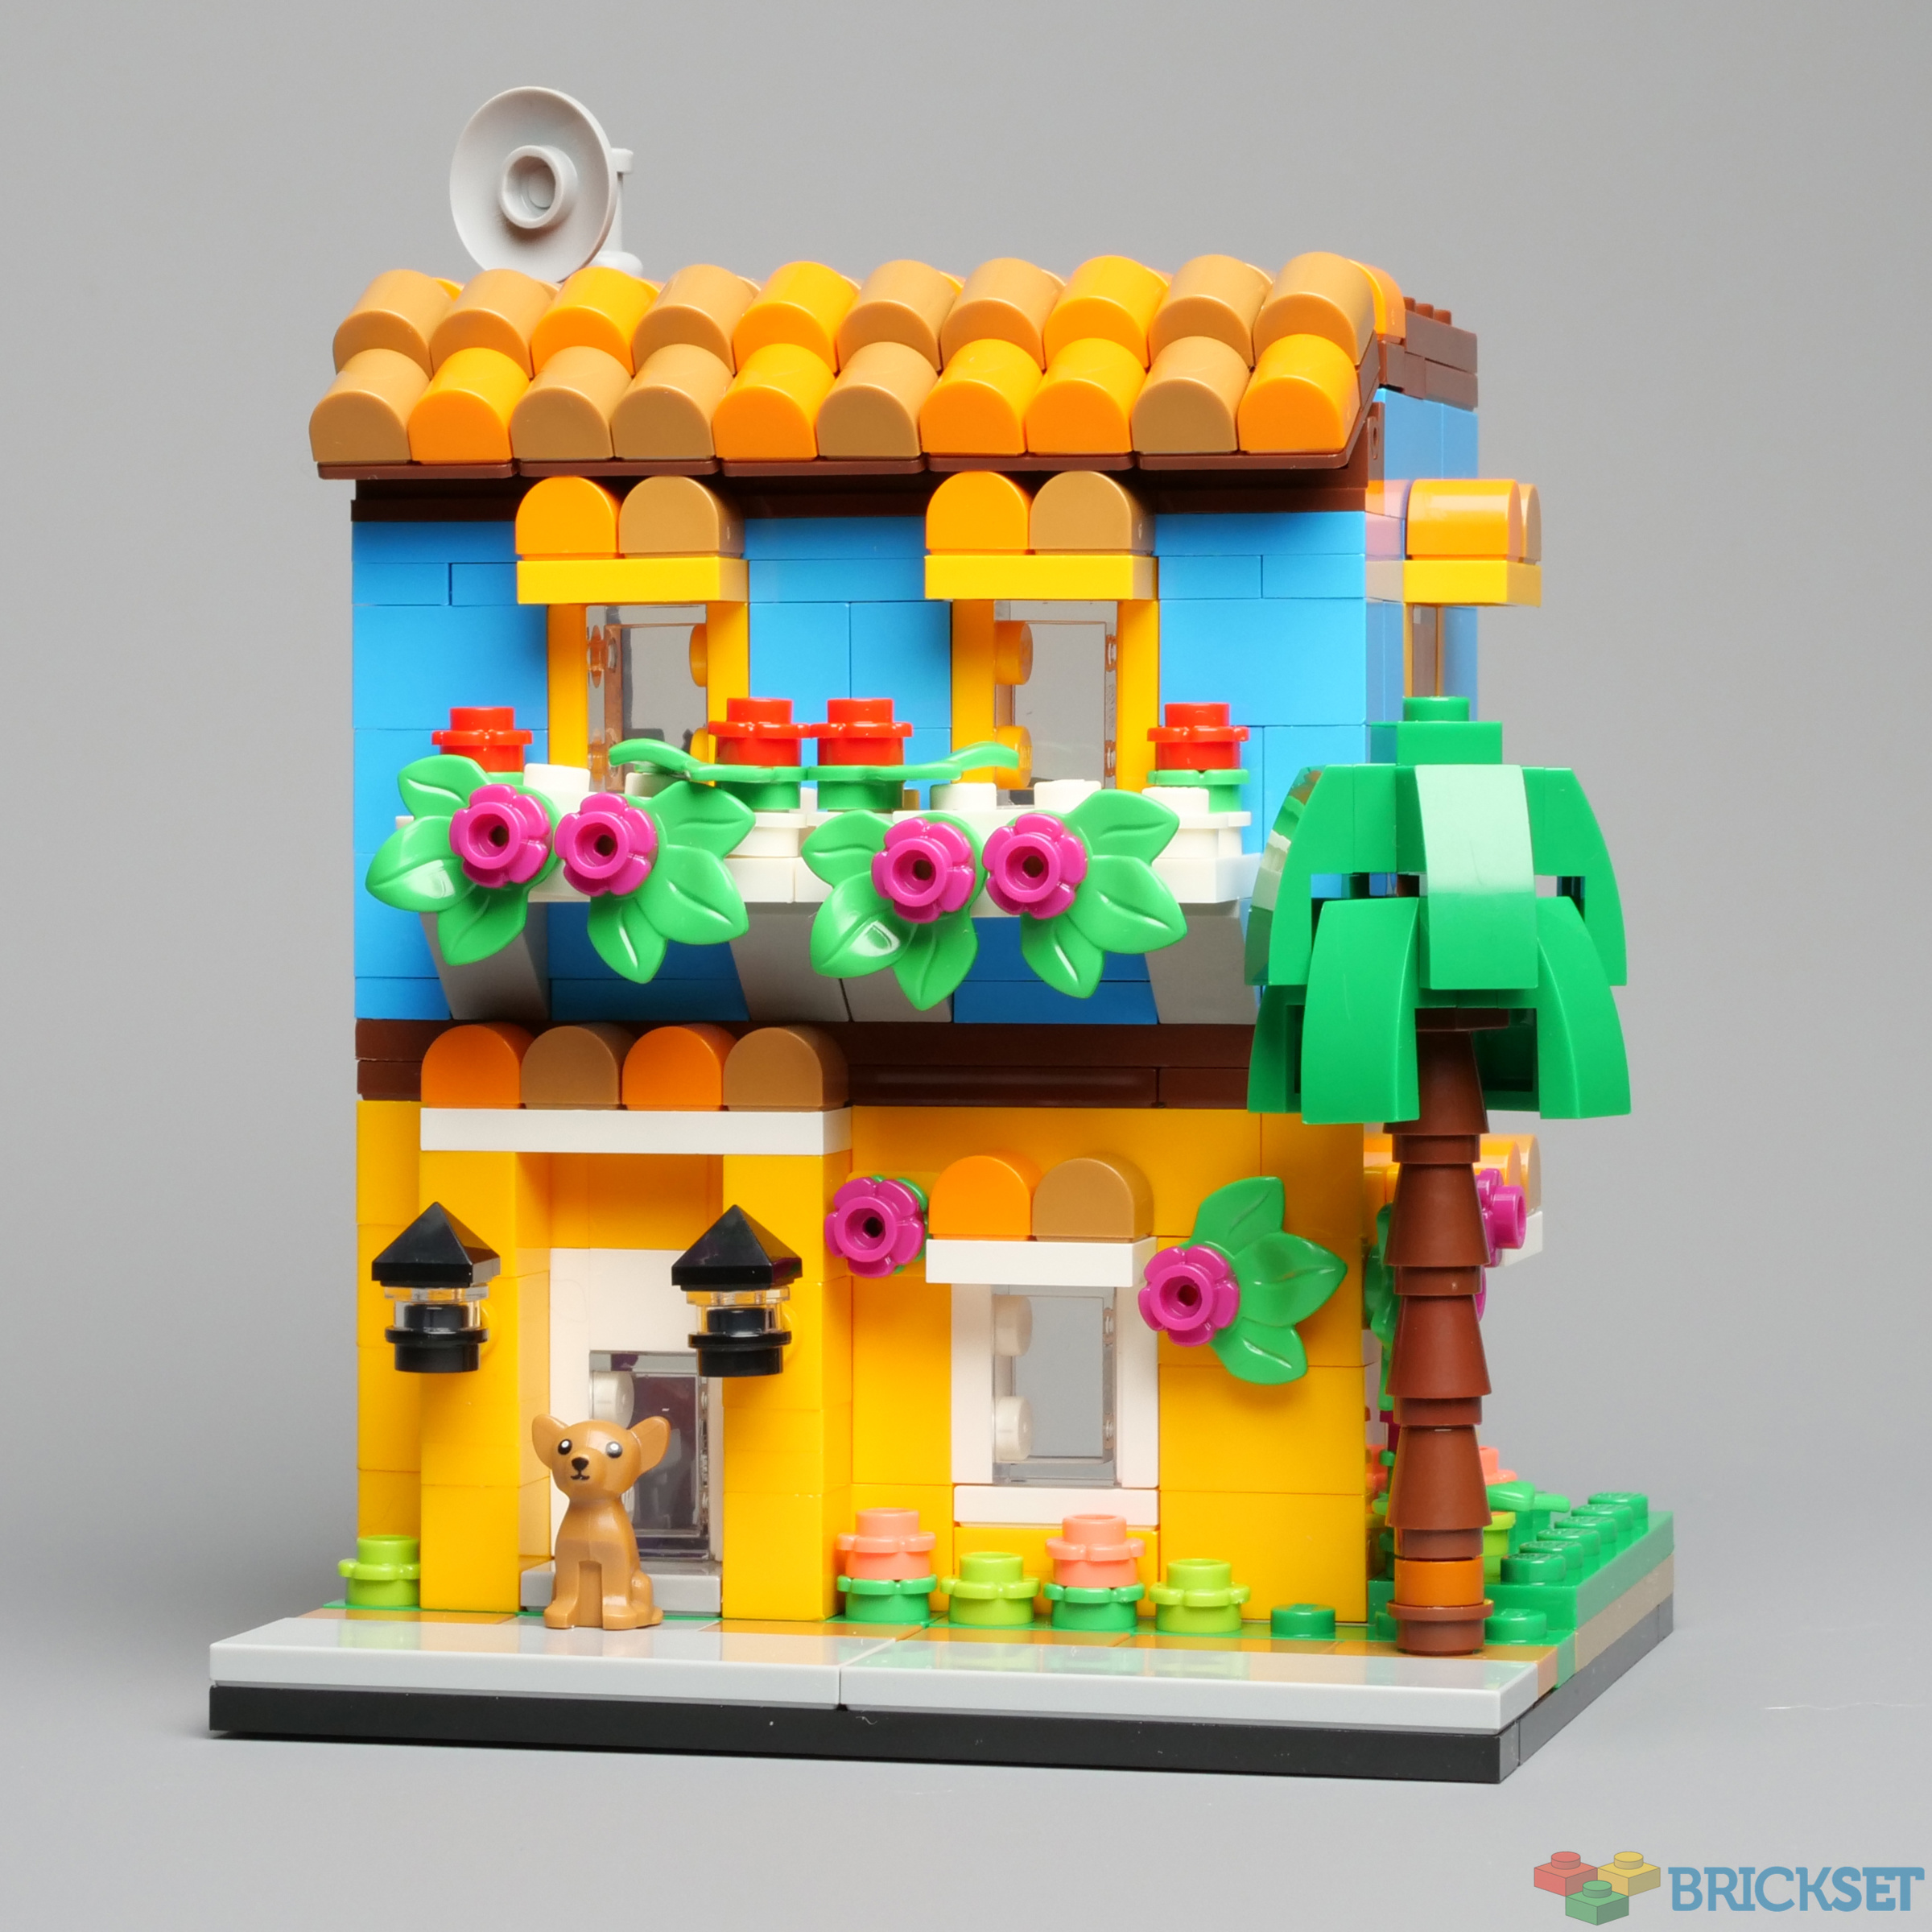 Build a College Dorm Room in 5 Easy LEGO Builds! 